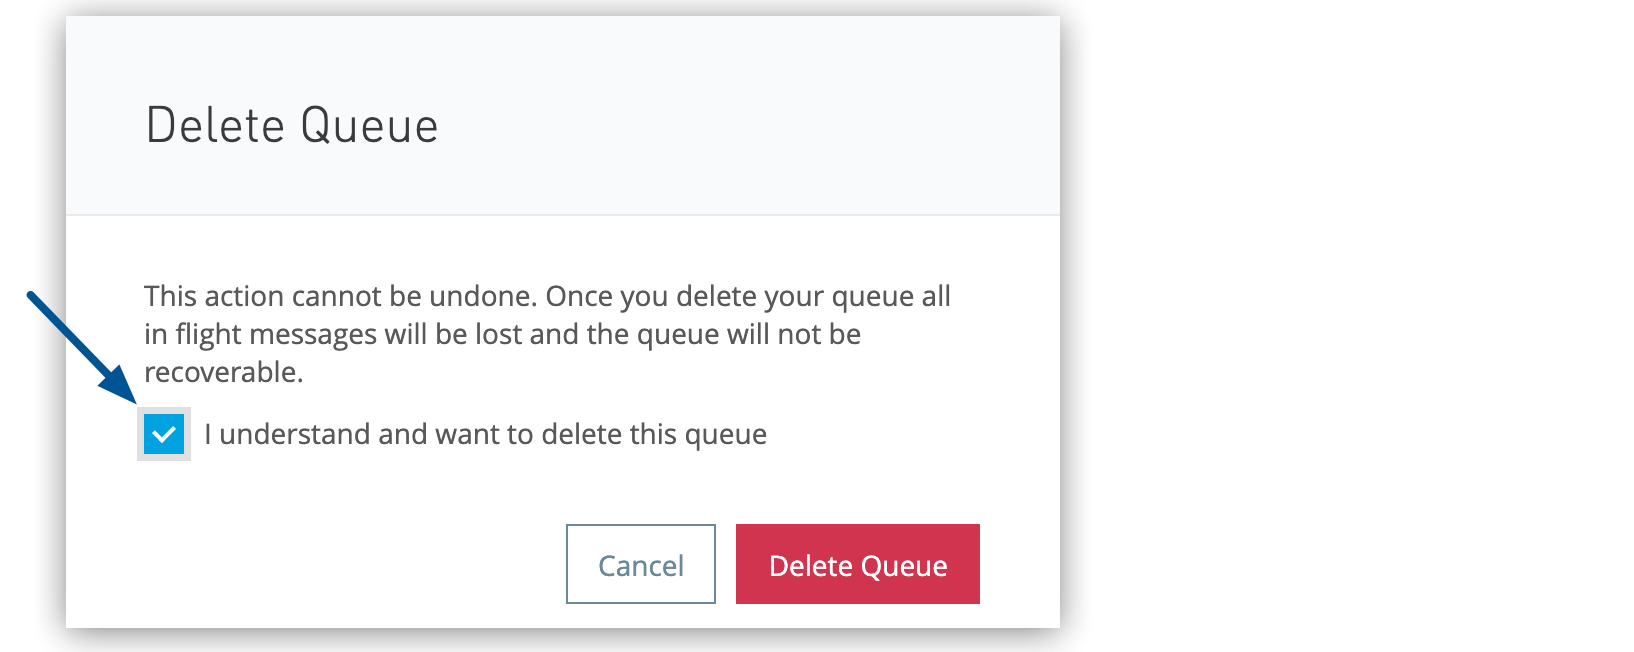 Accept checkbox for deleting a queue